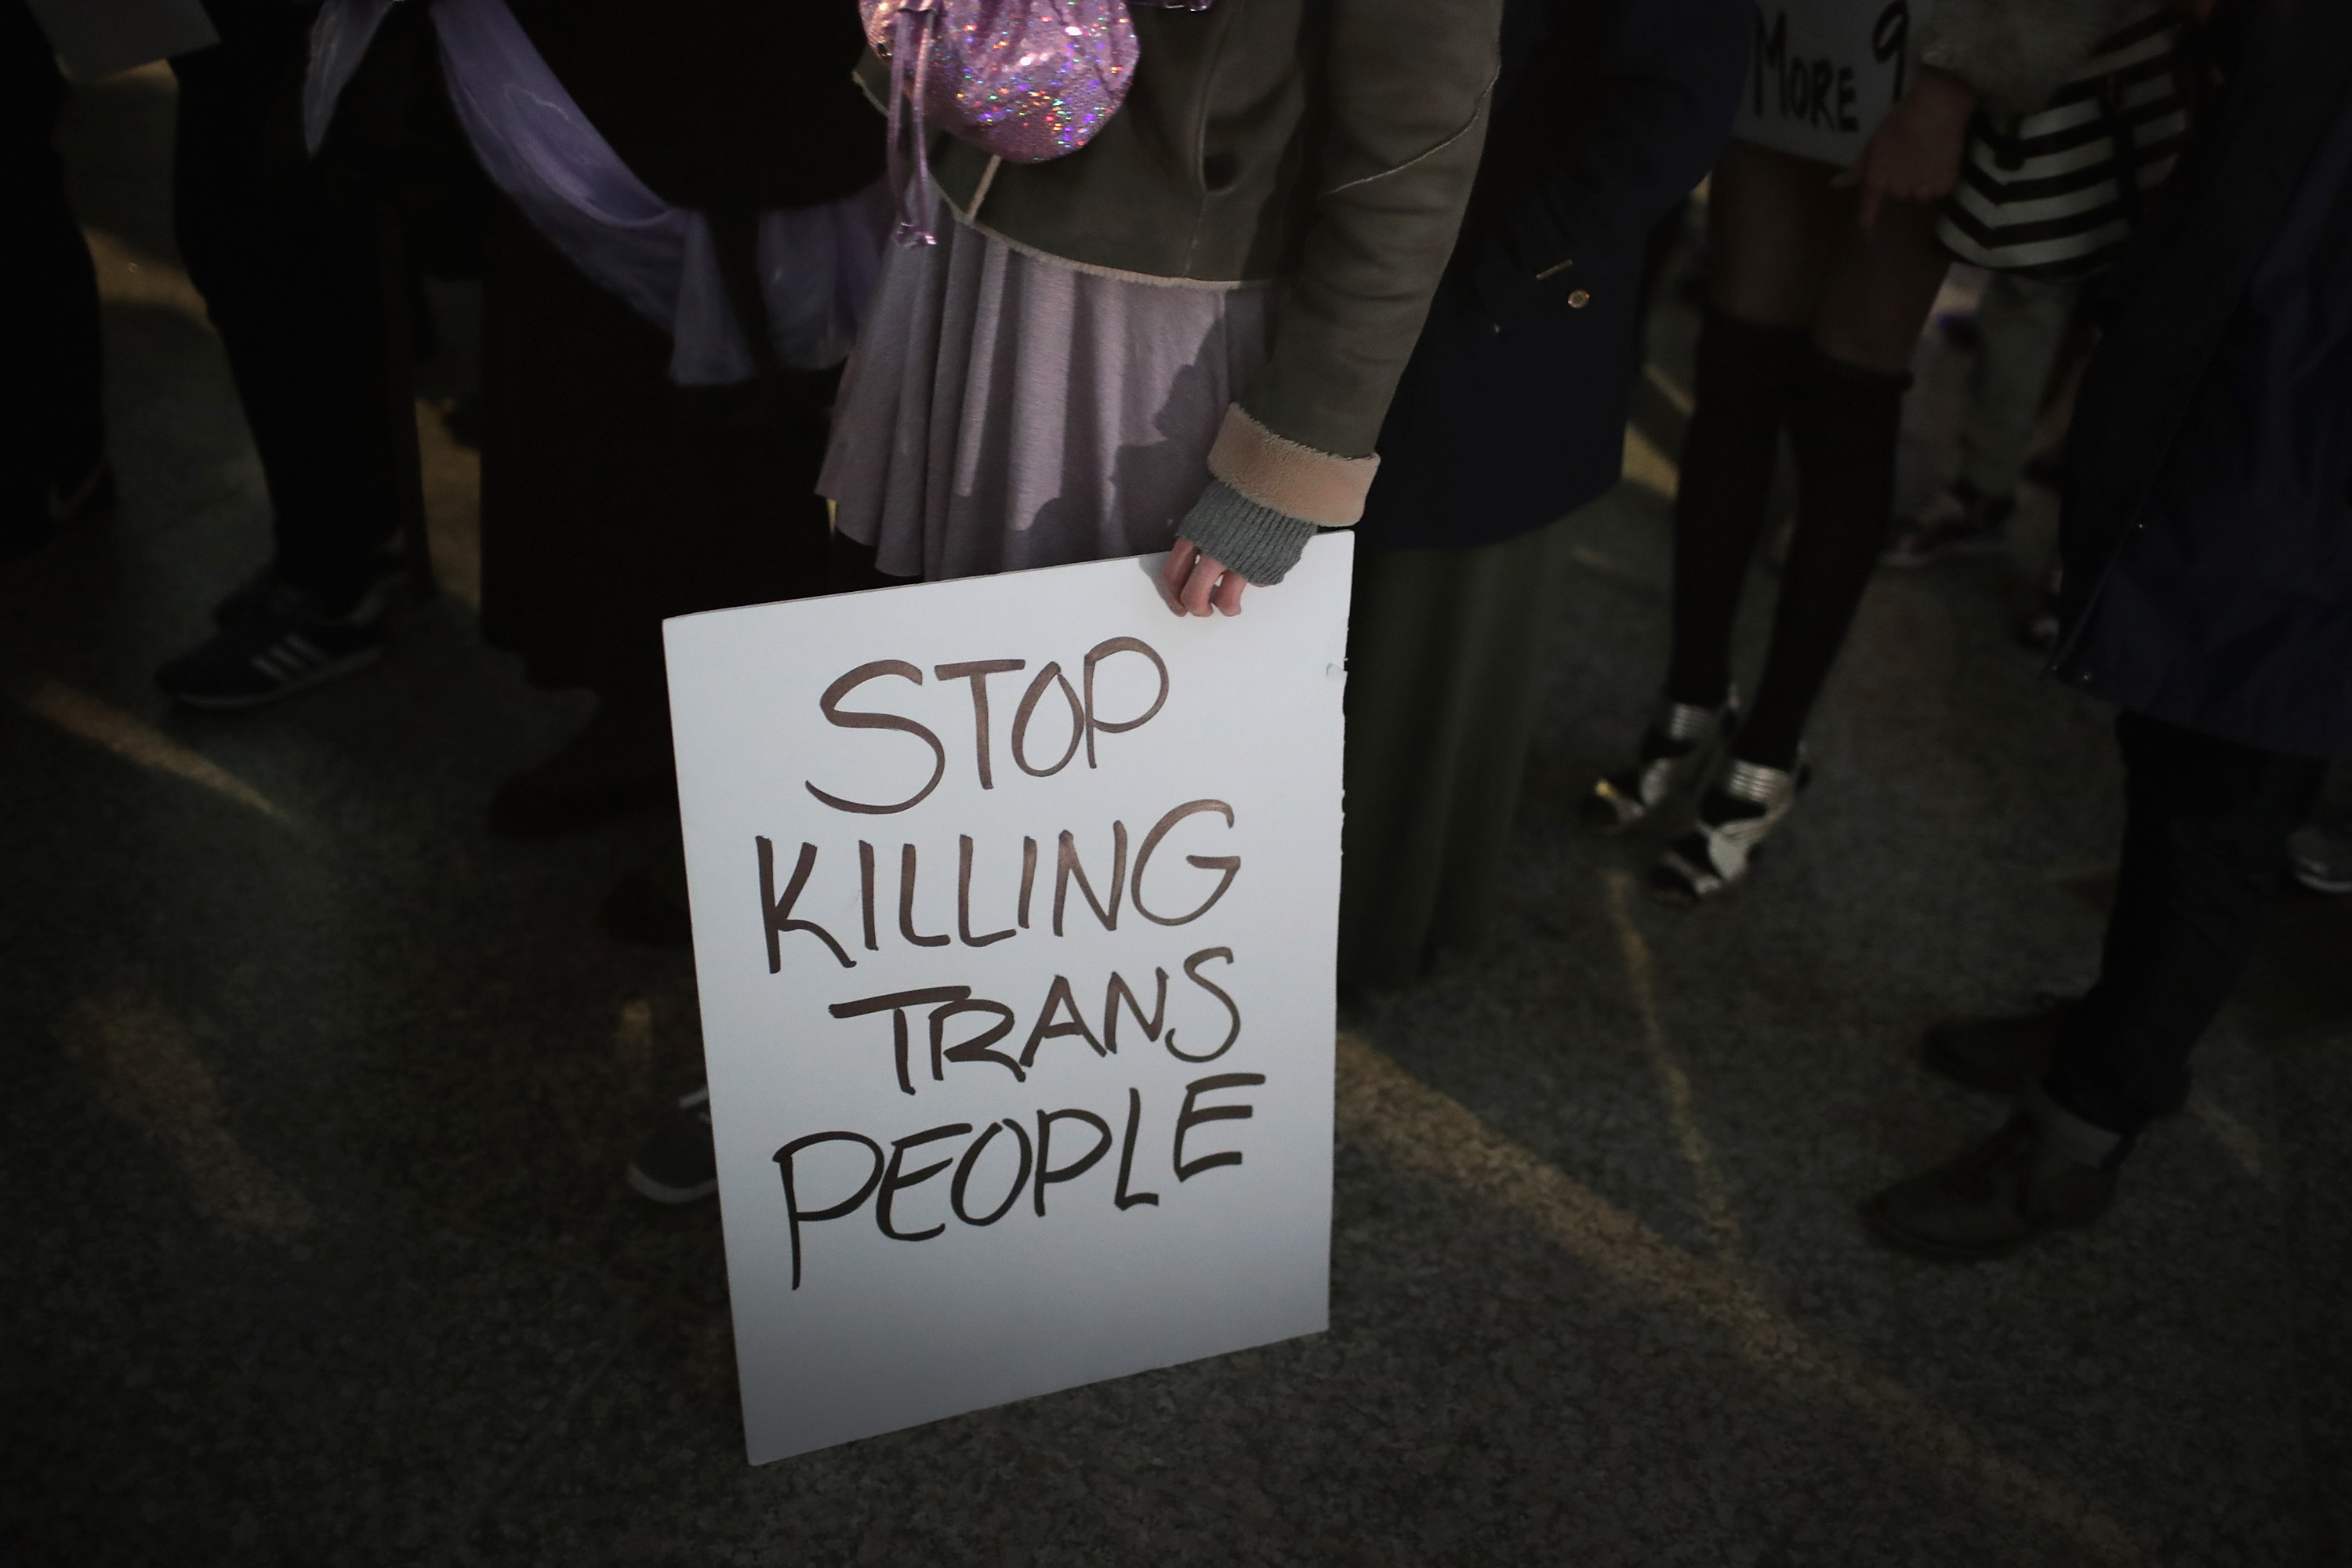 331 trans people have been murdered since last year's report